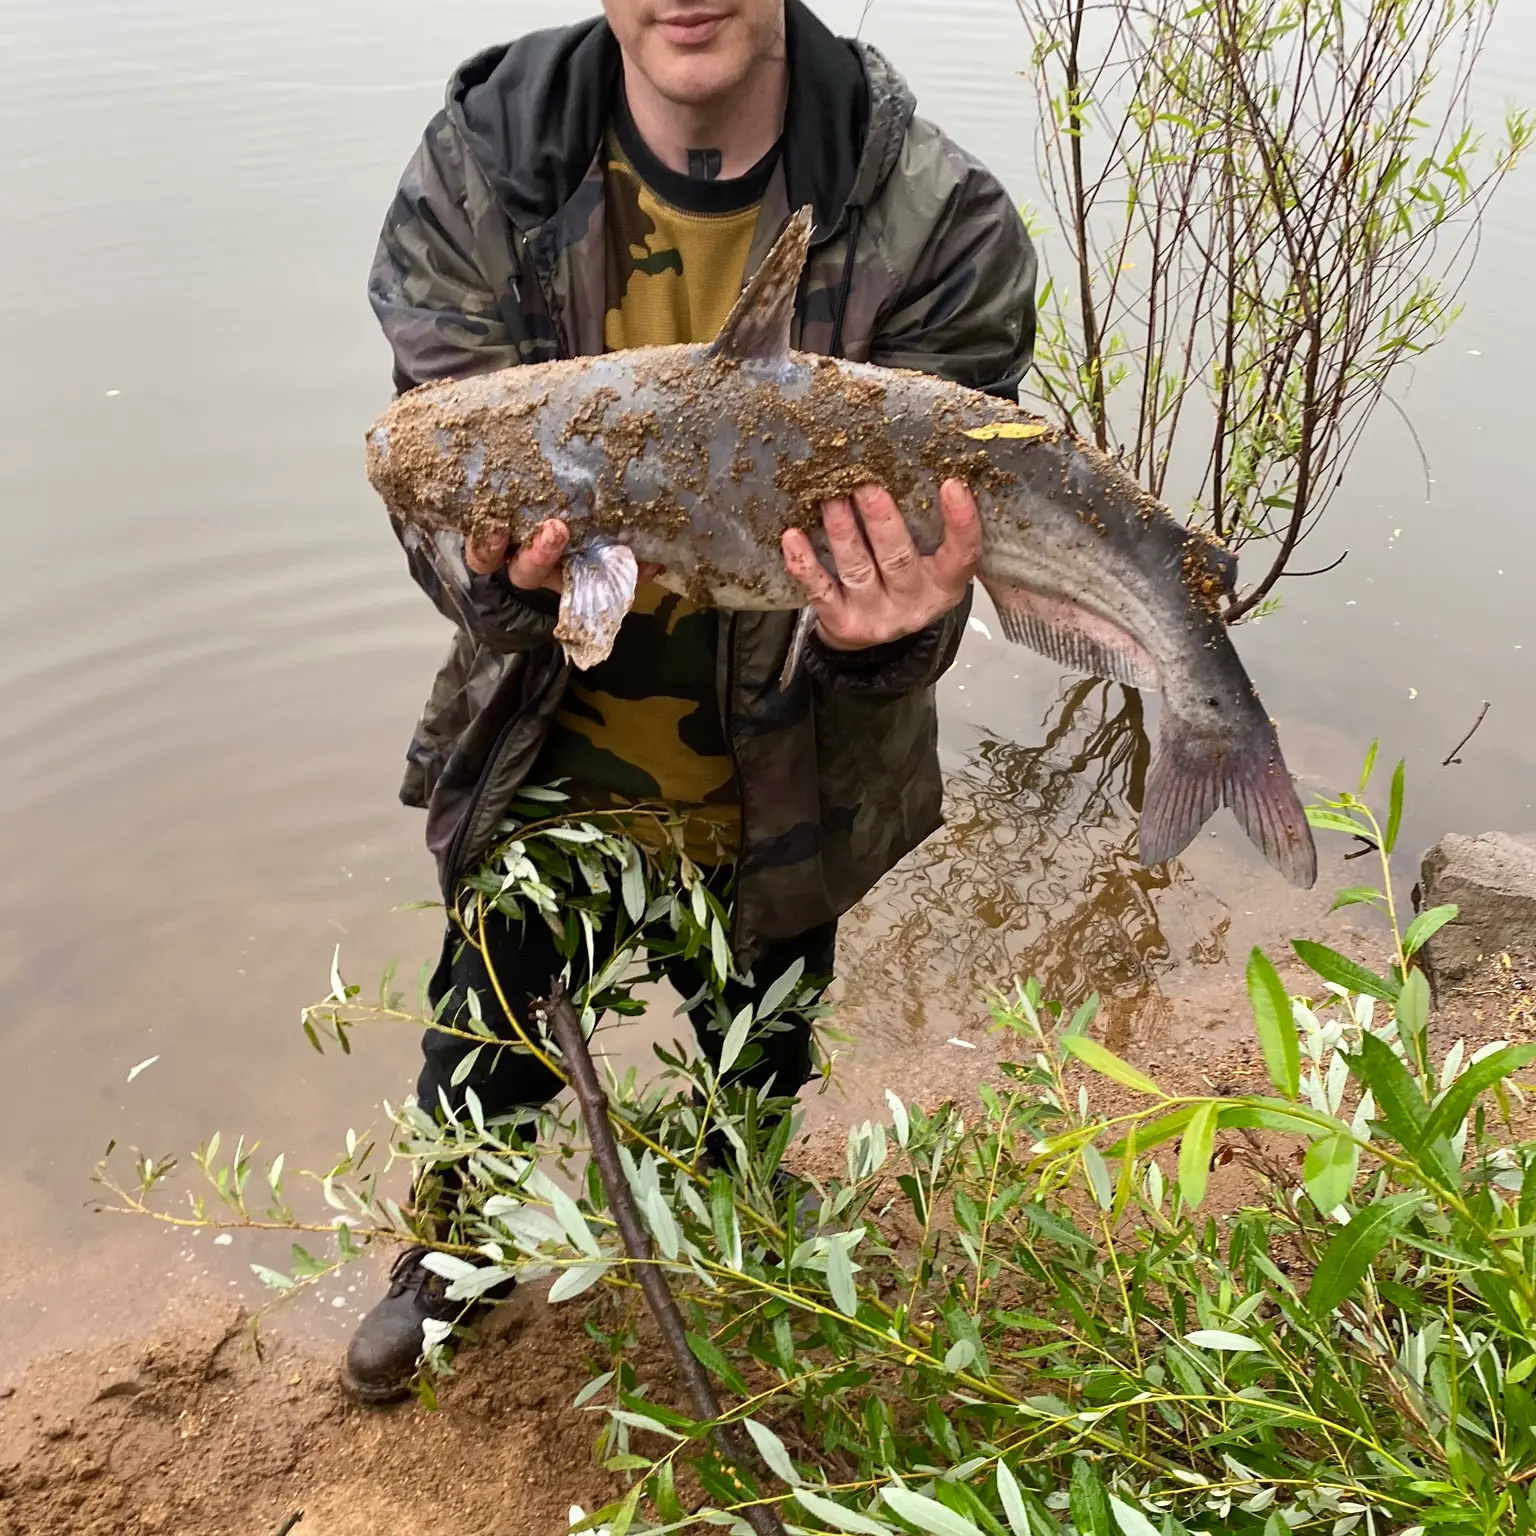 Lake Wohlford catfish record broken while trout anglers count down